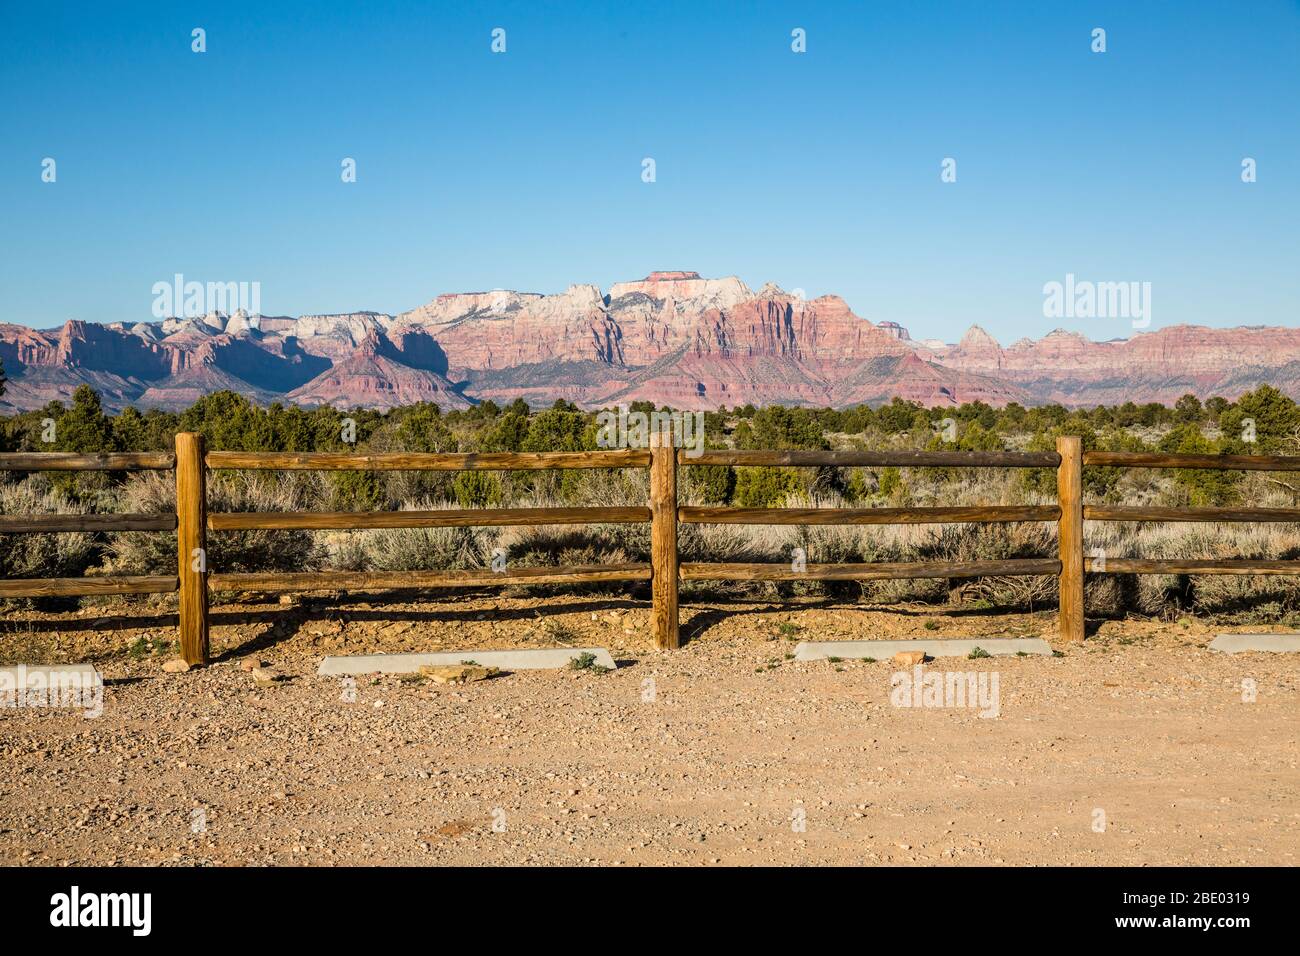 Wooden fence along the edge of an empty trailhead parking area in the desert of Southern Utah. Stock Photo